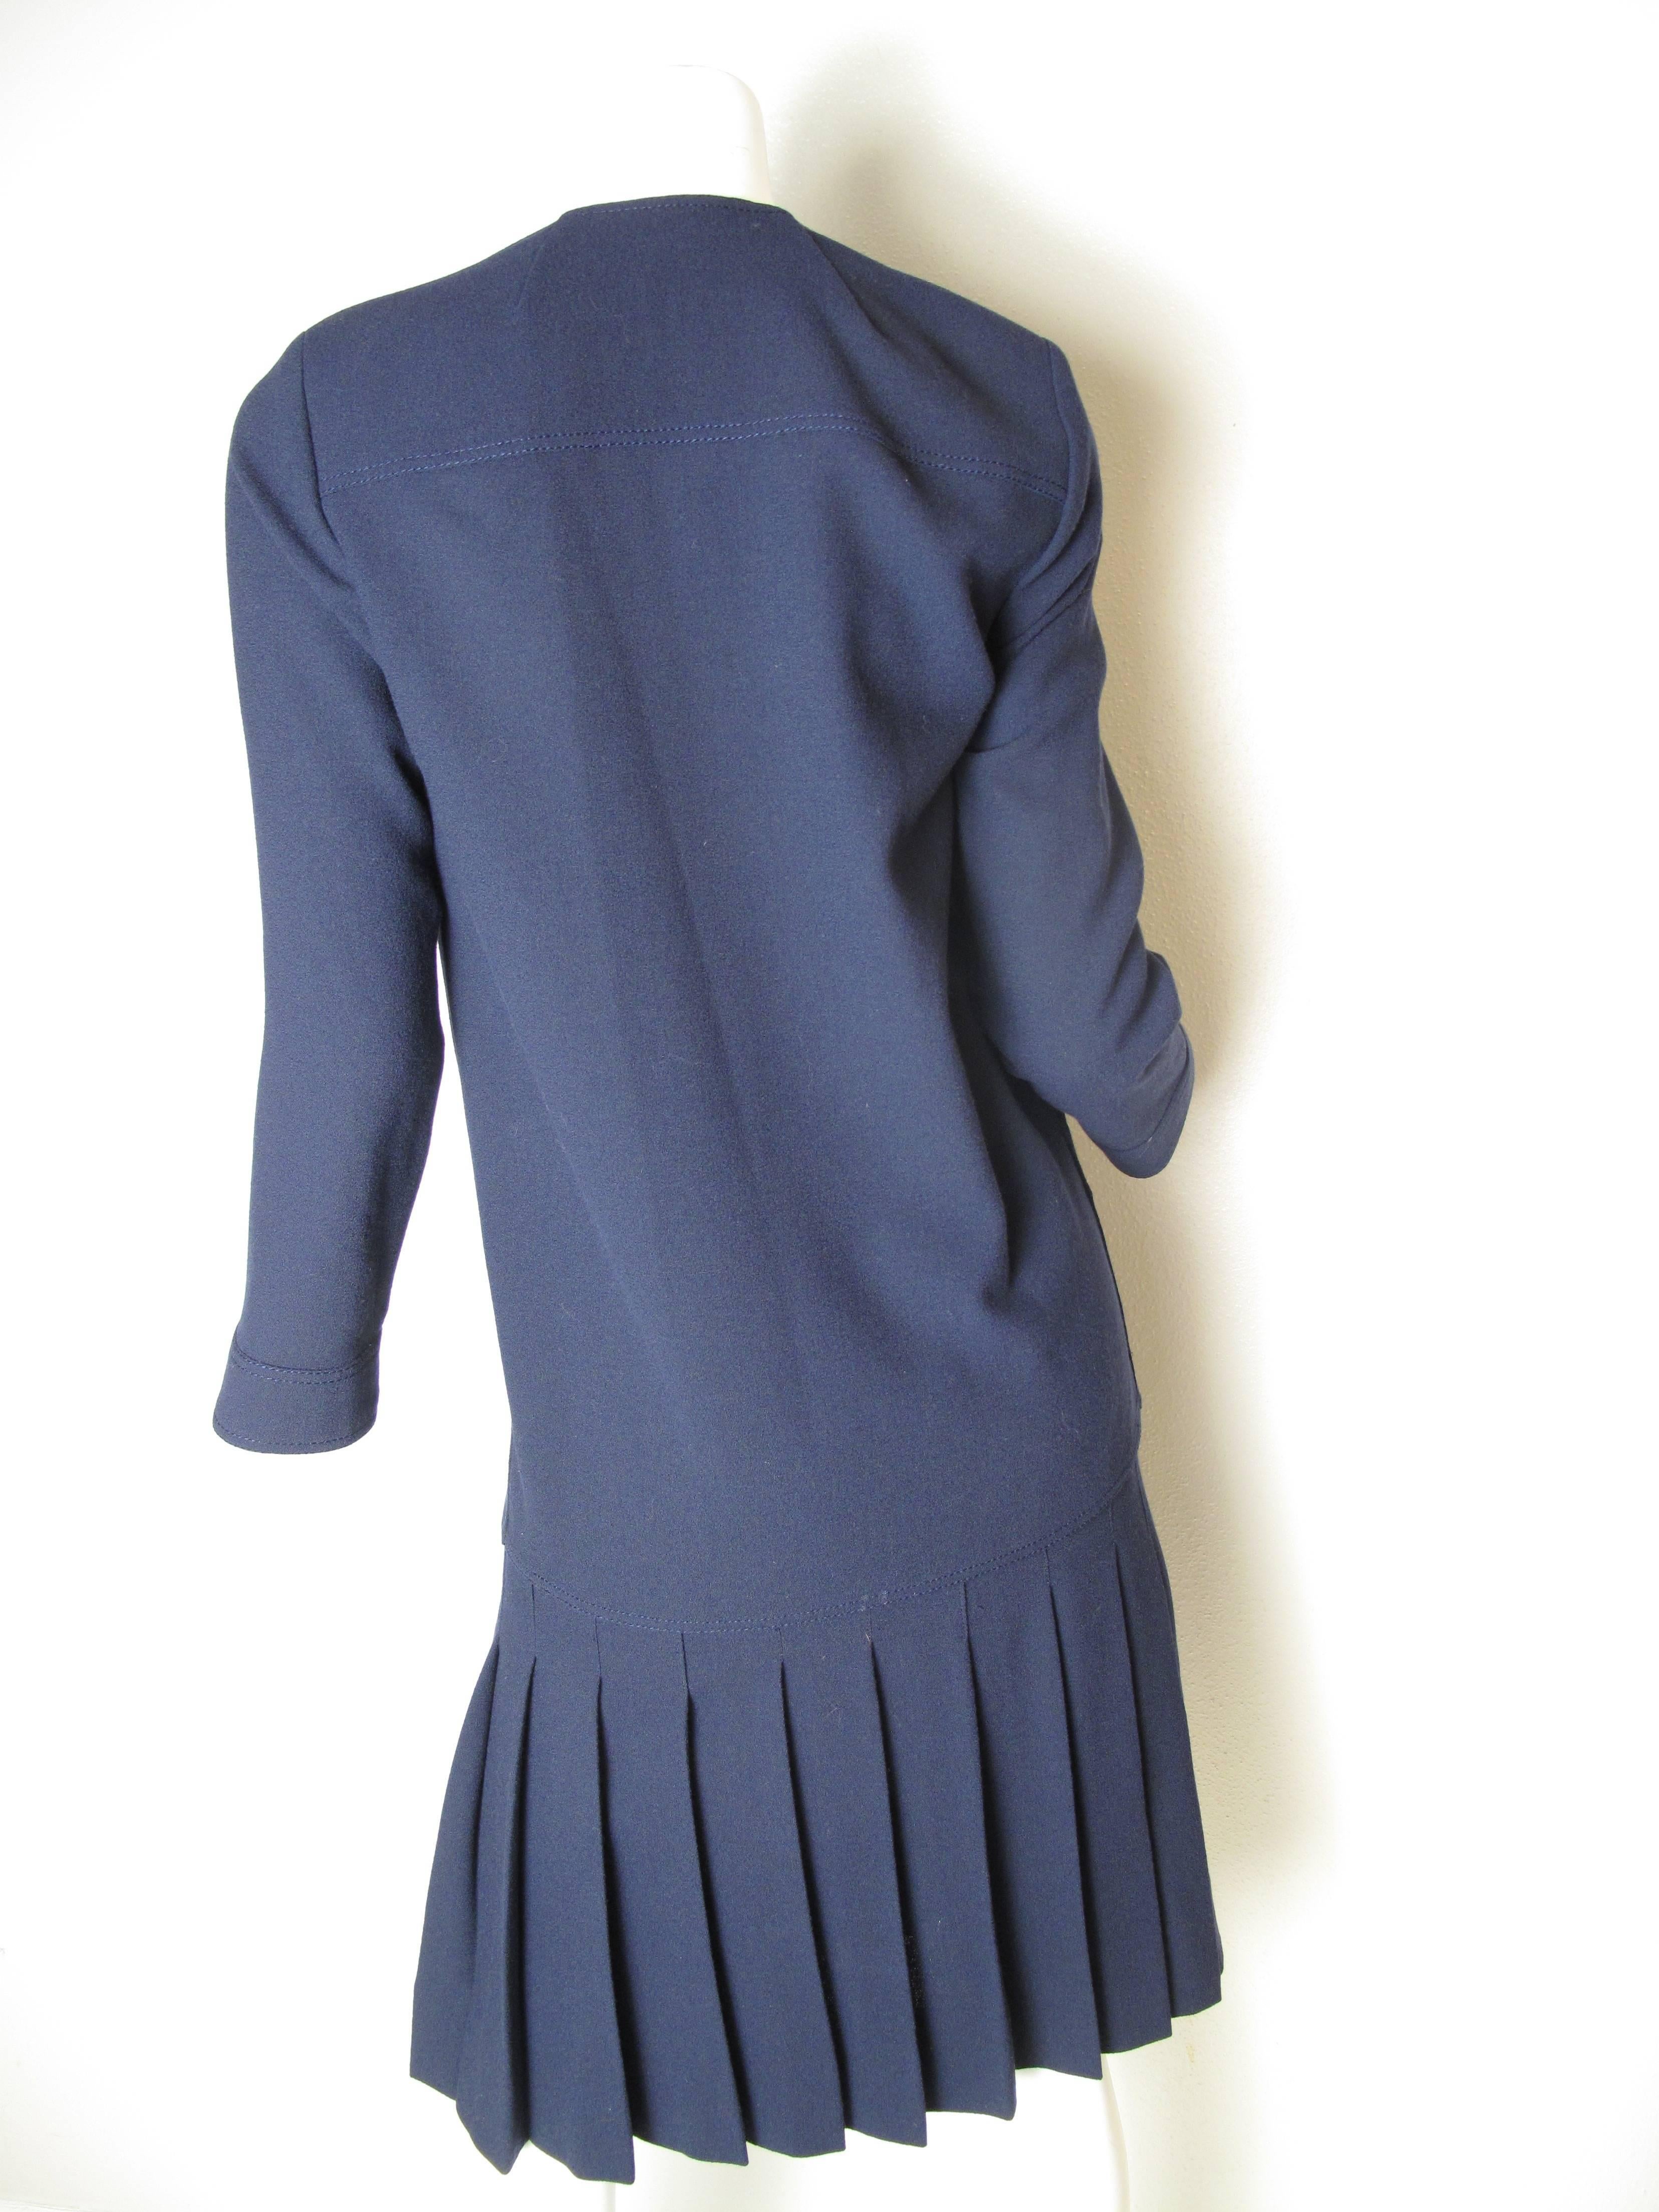 Chanel navy wool suit with pleated skirt. Double breasted jacket.  Condition: Excellent. Size 6

 We accept returns for refund, please see our terms. We offer free ground shipping within the US. Please let us know if you have any questions.